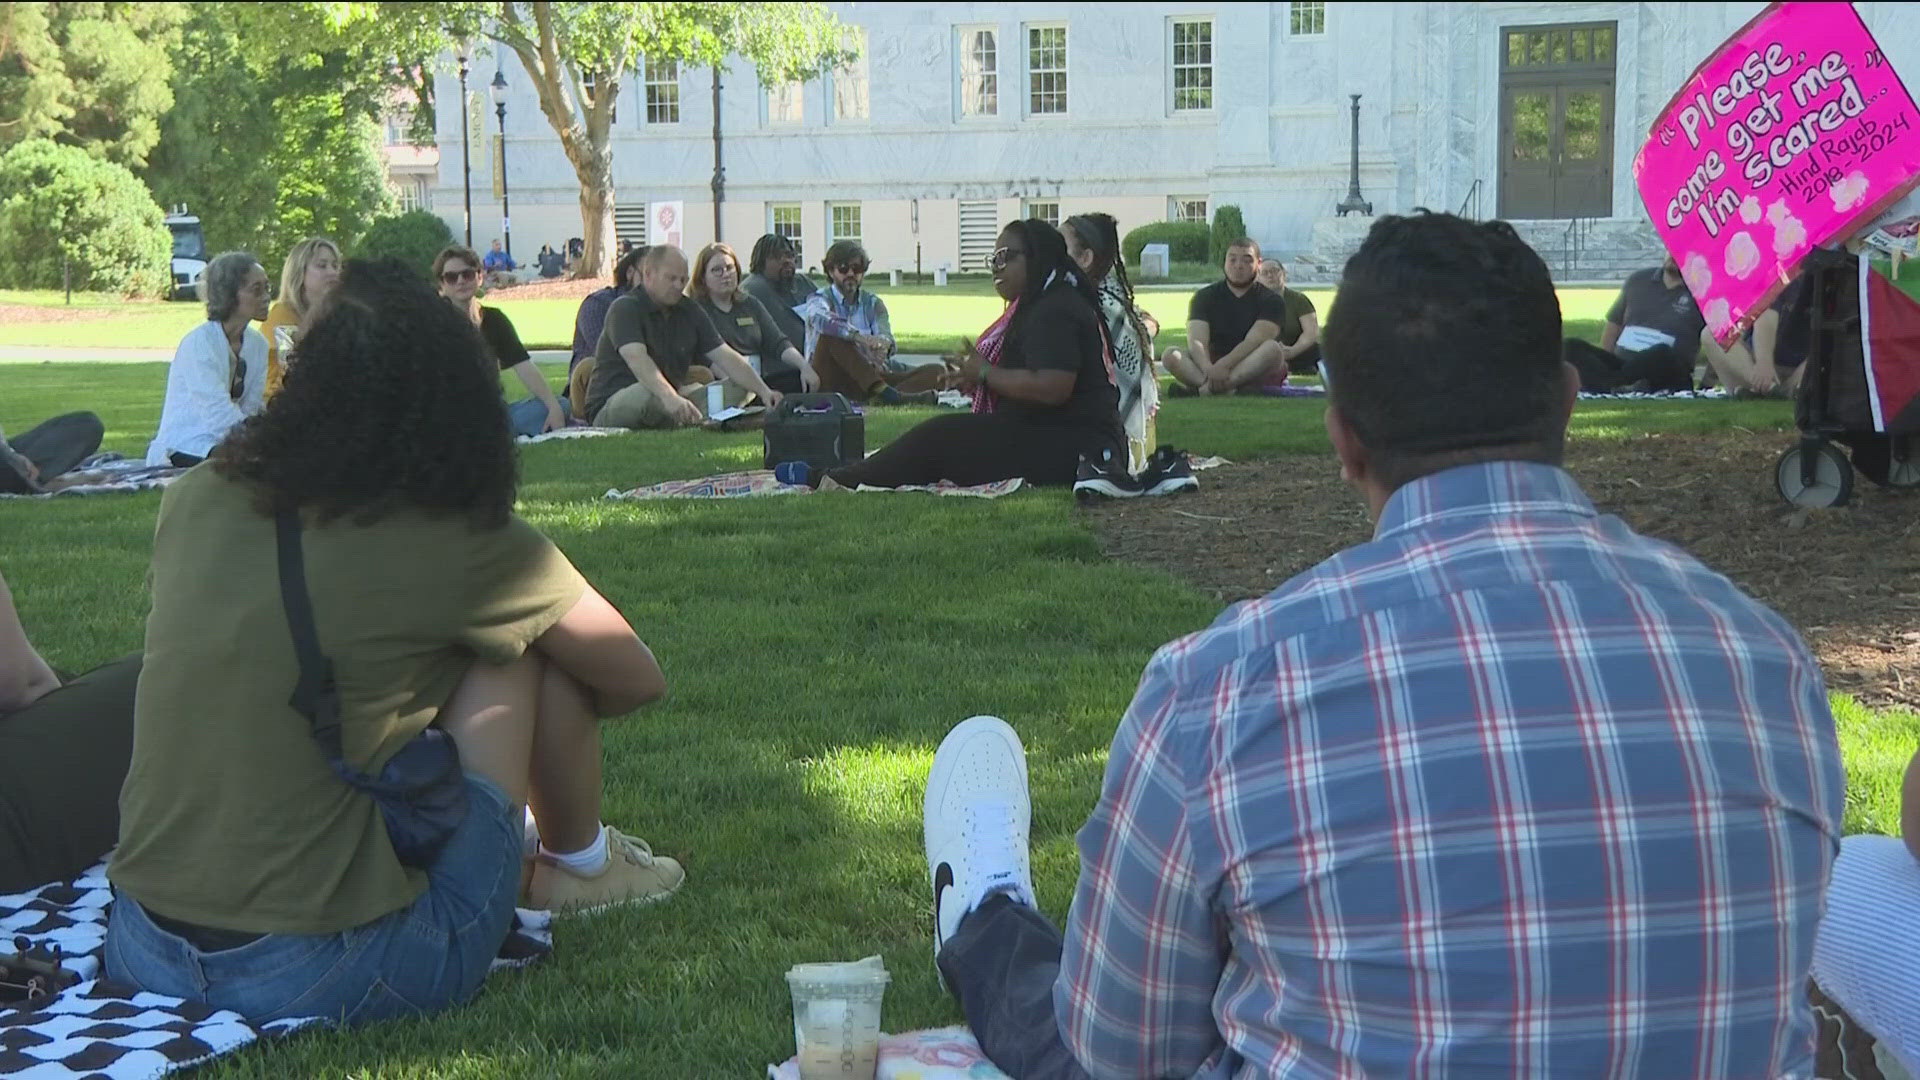 It comes after two dozen people were arrested, with 20 of those from the Emory community.